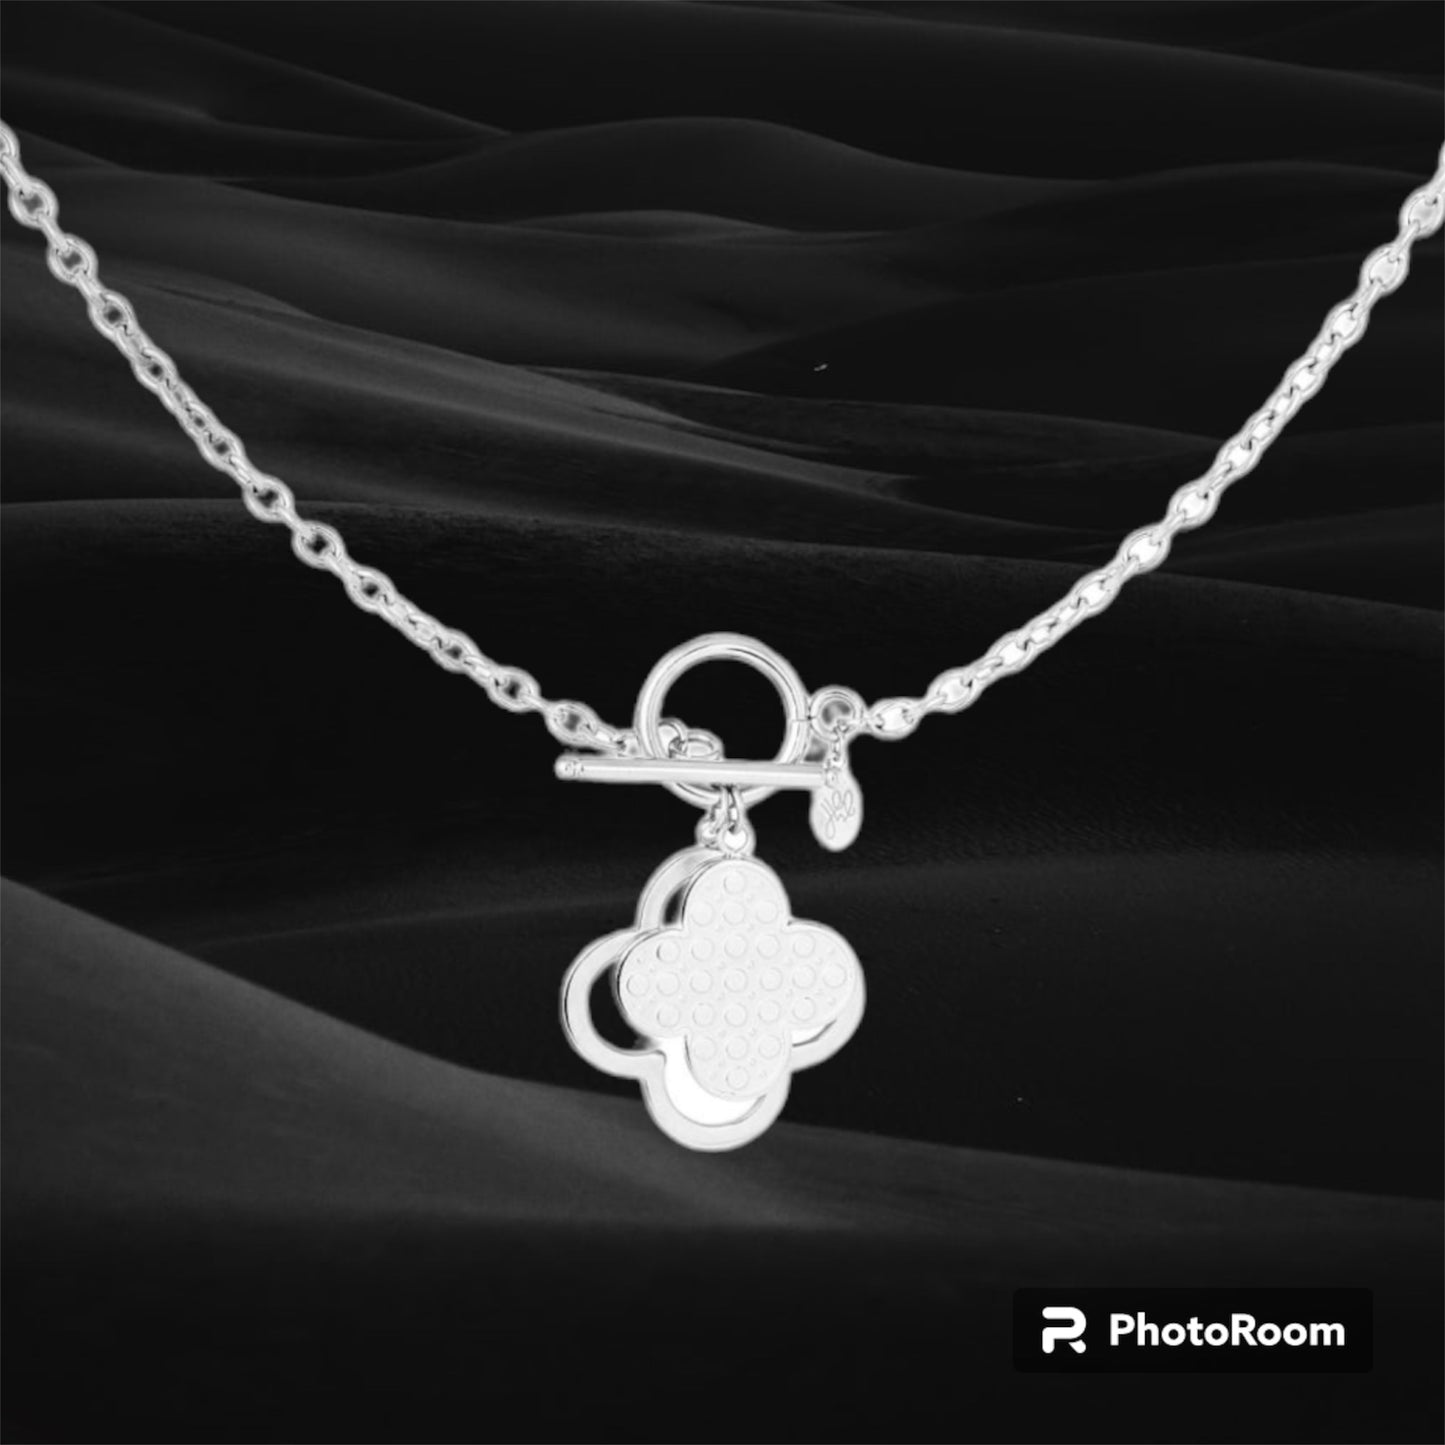 Janet Chain Stainless Steel Clover